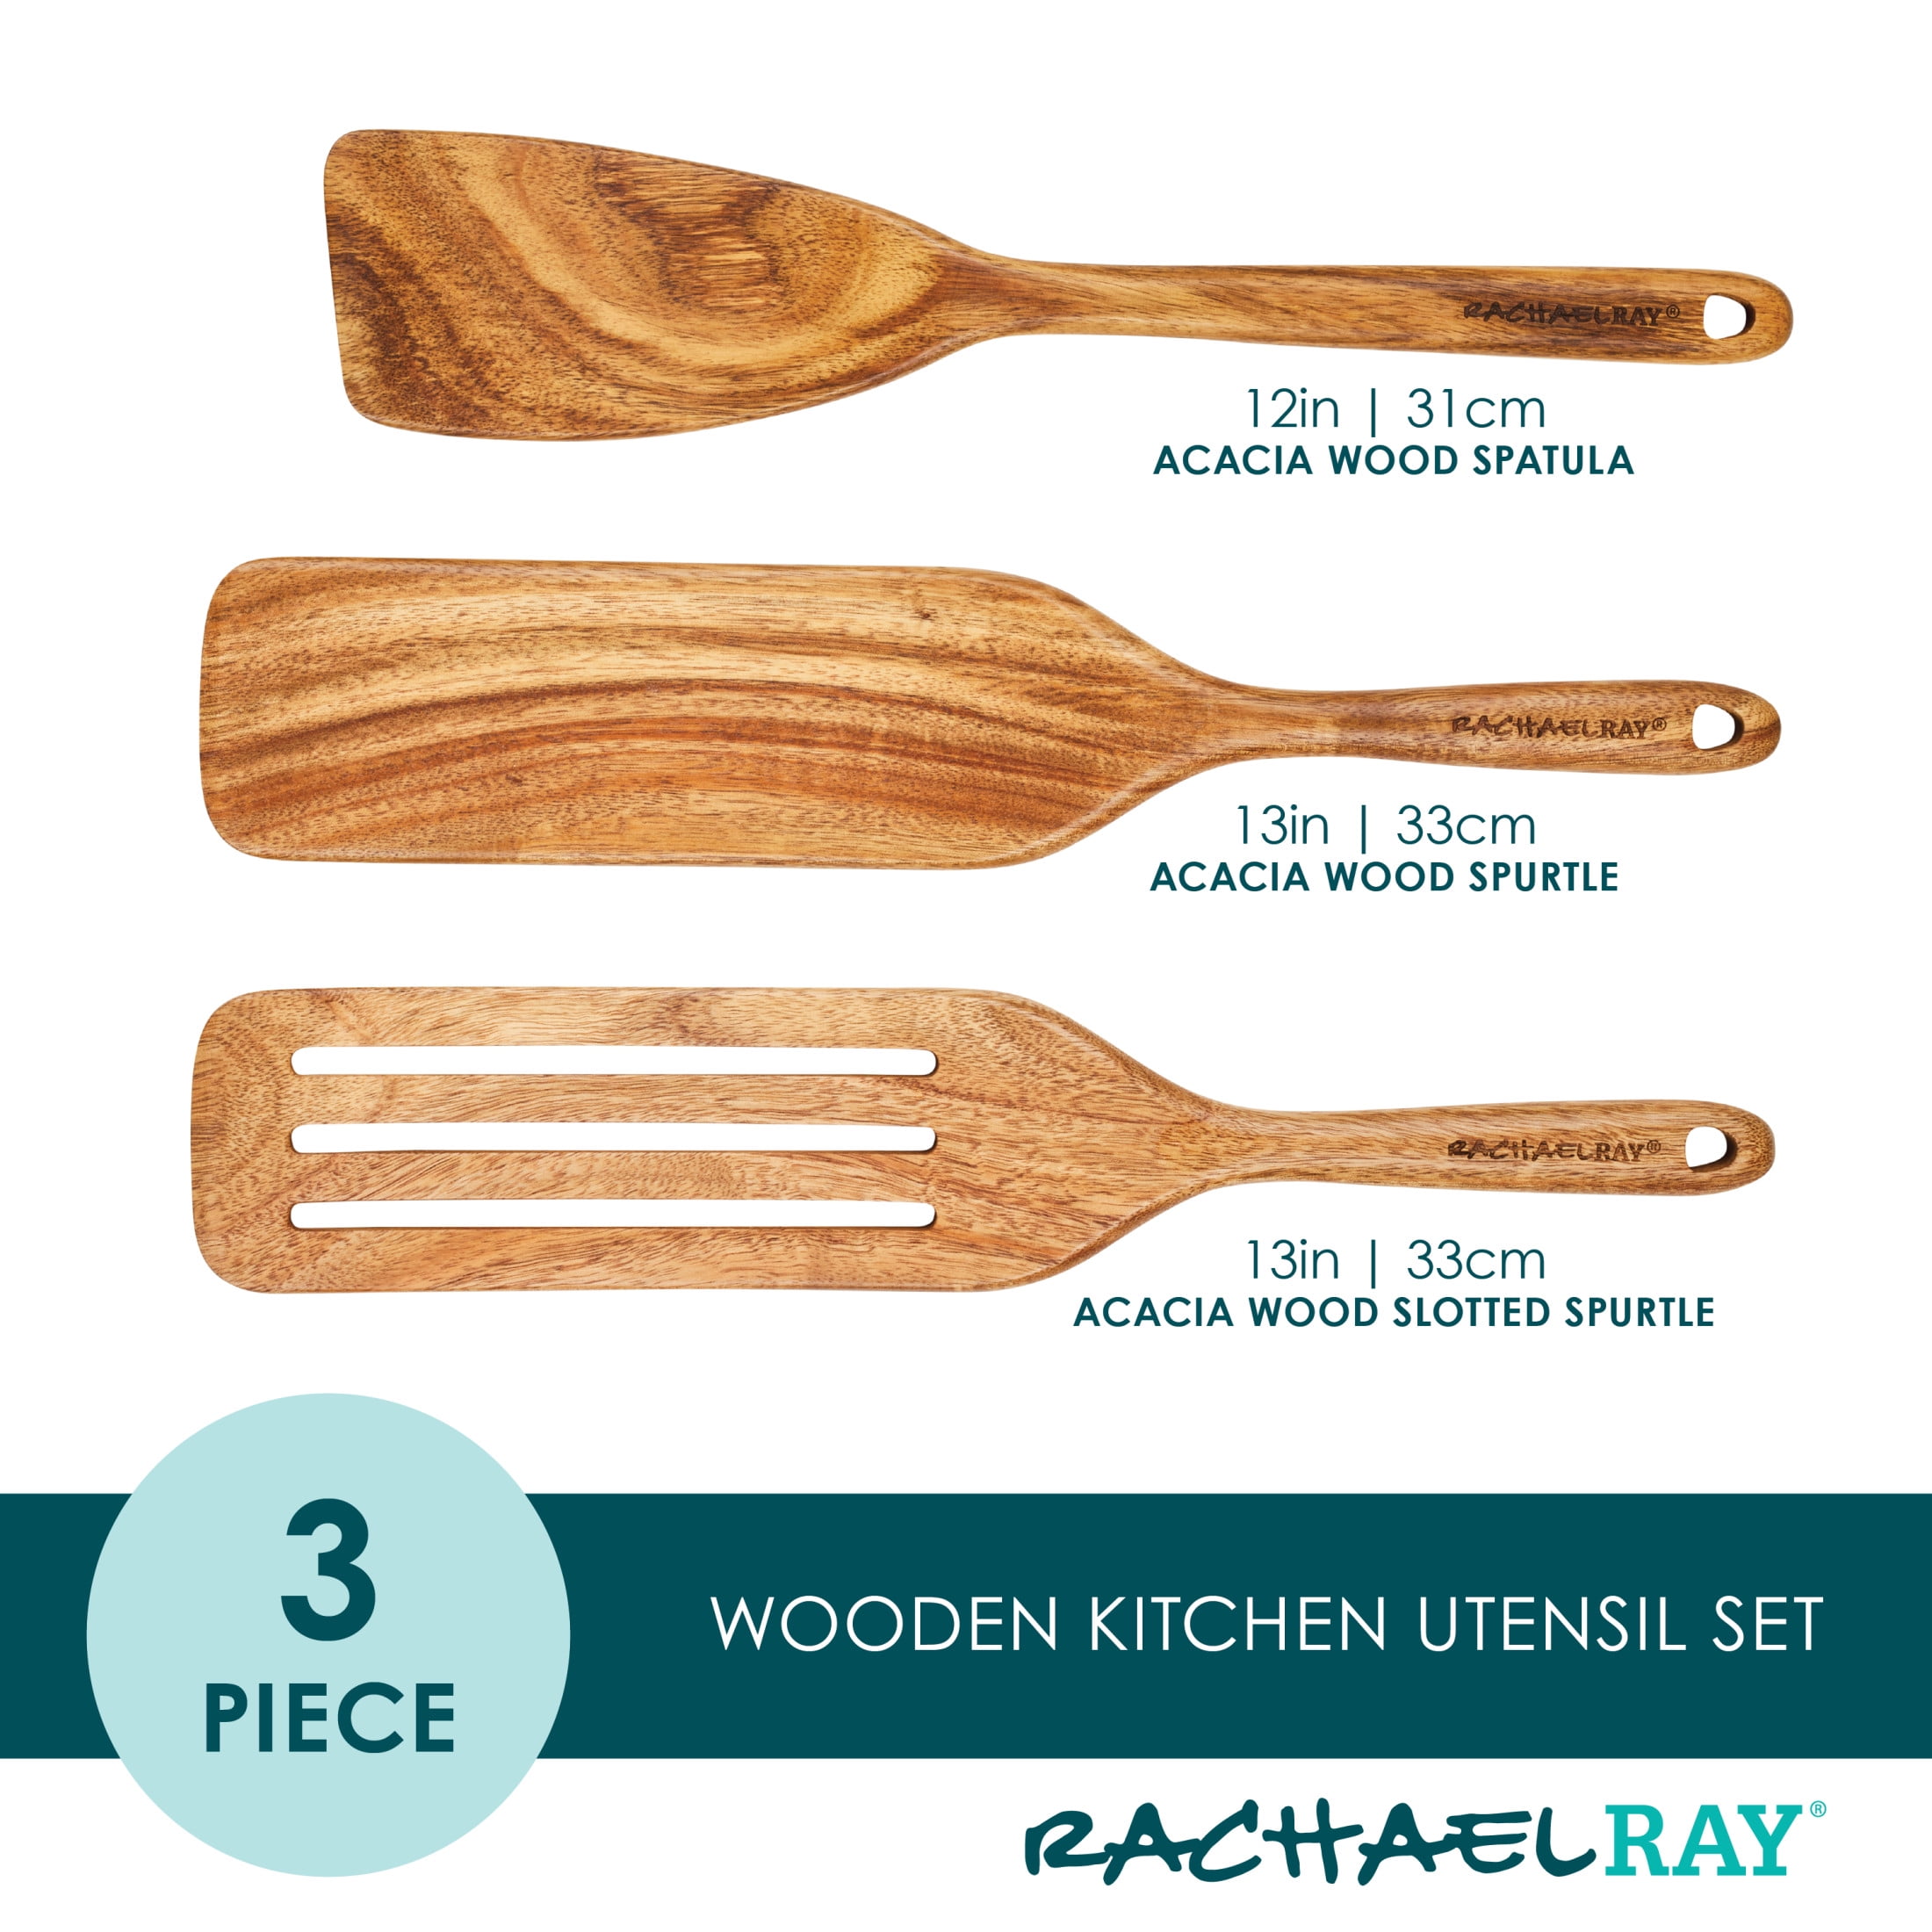 Silicone Kitchenware Rachael Ray Silicone Utensils Set Eco Friendly Heat  Resistant Kitchen Storage Box Rachael Ray Silicone Utensils Baking Tools  Sets VT1600 From Homedec888, $16.5